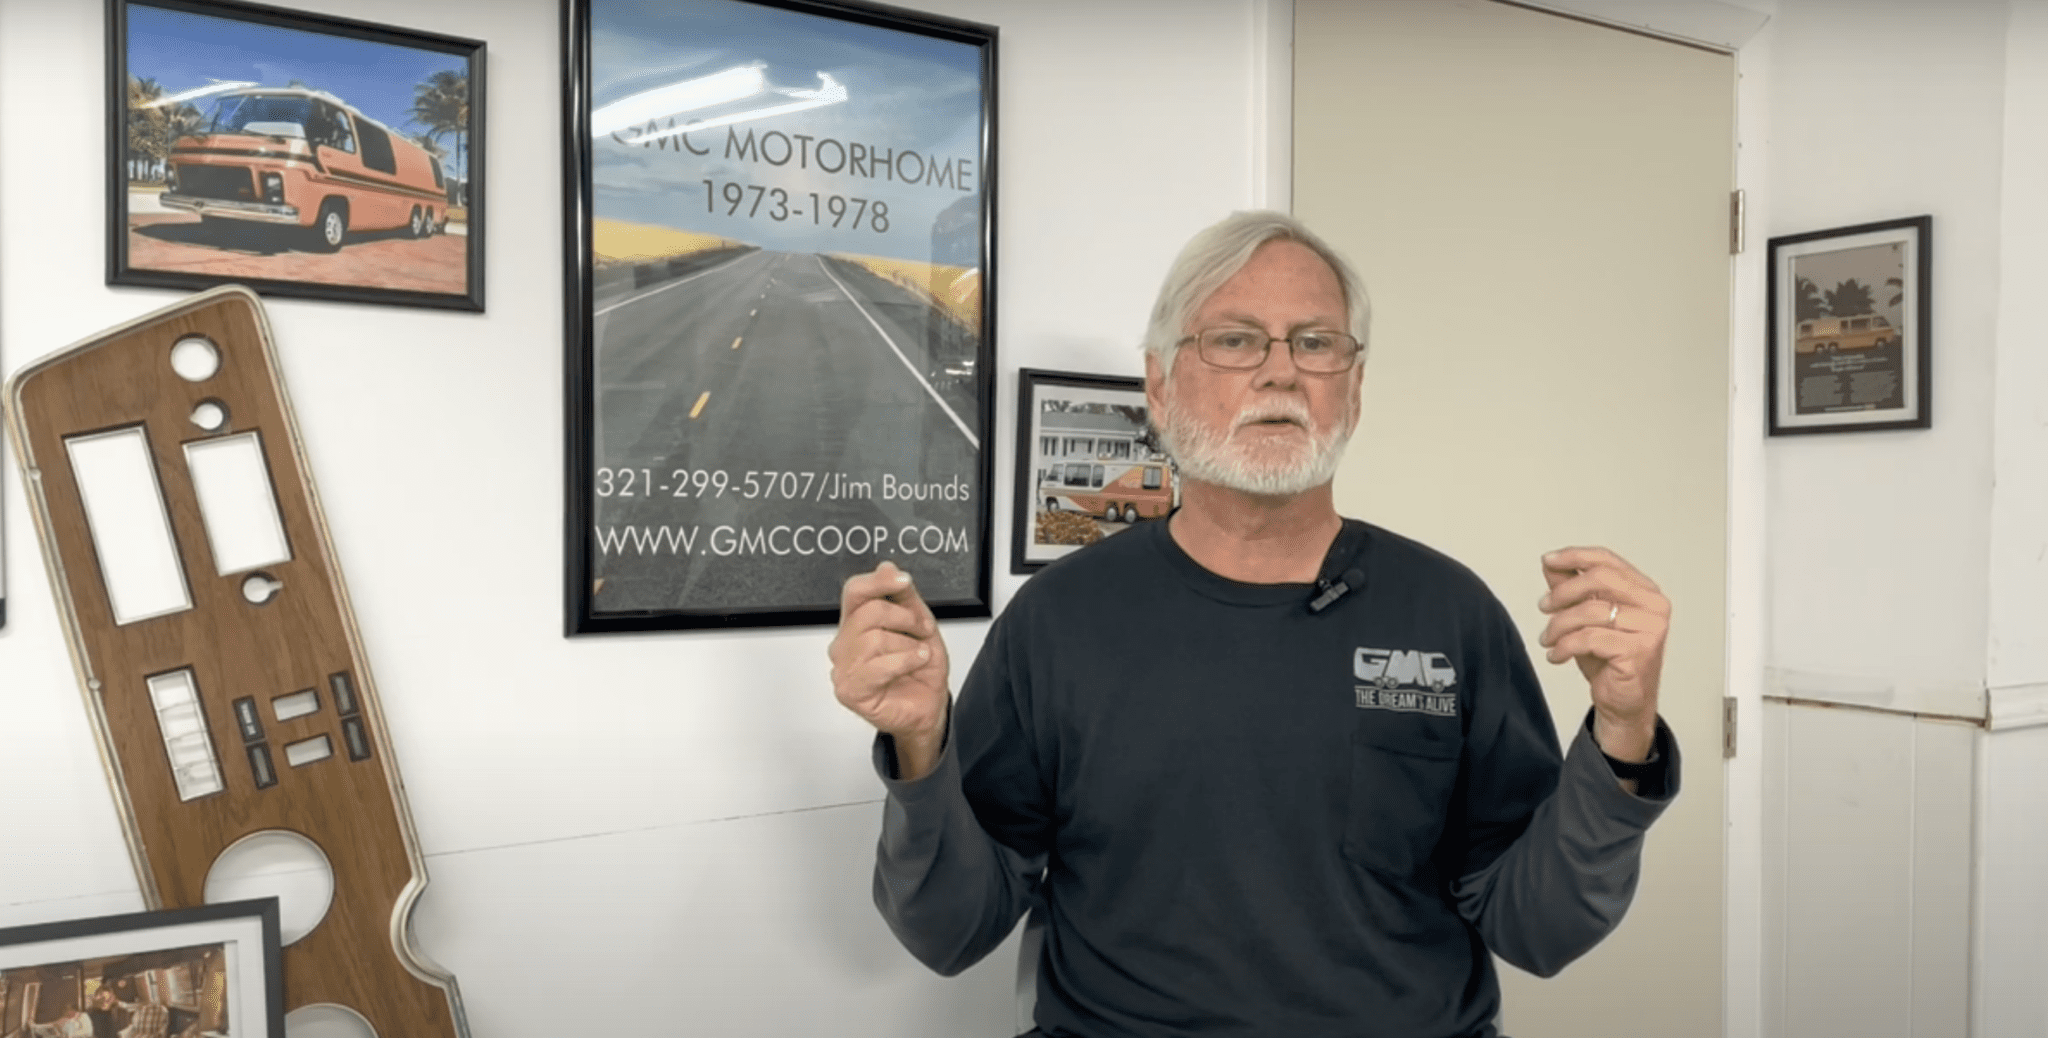 Jim Bounds discusses how to determine if the motor in your GMC Motorhome is bad